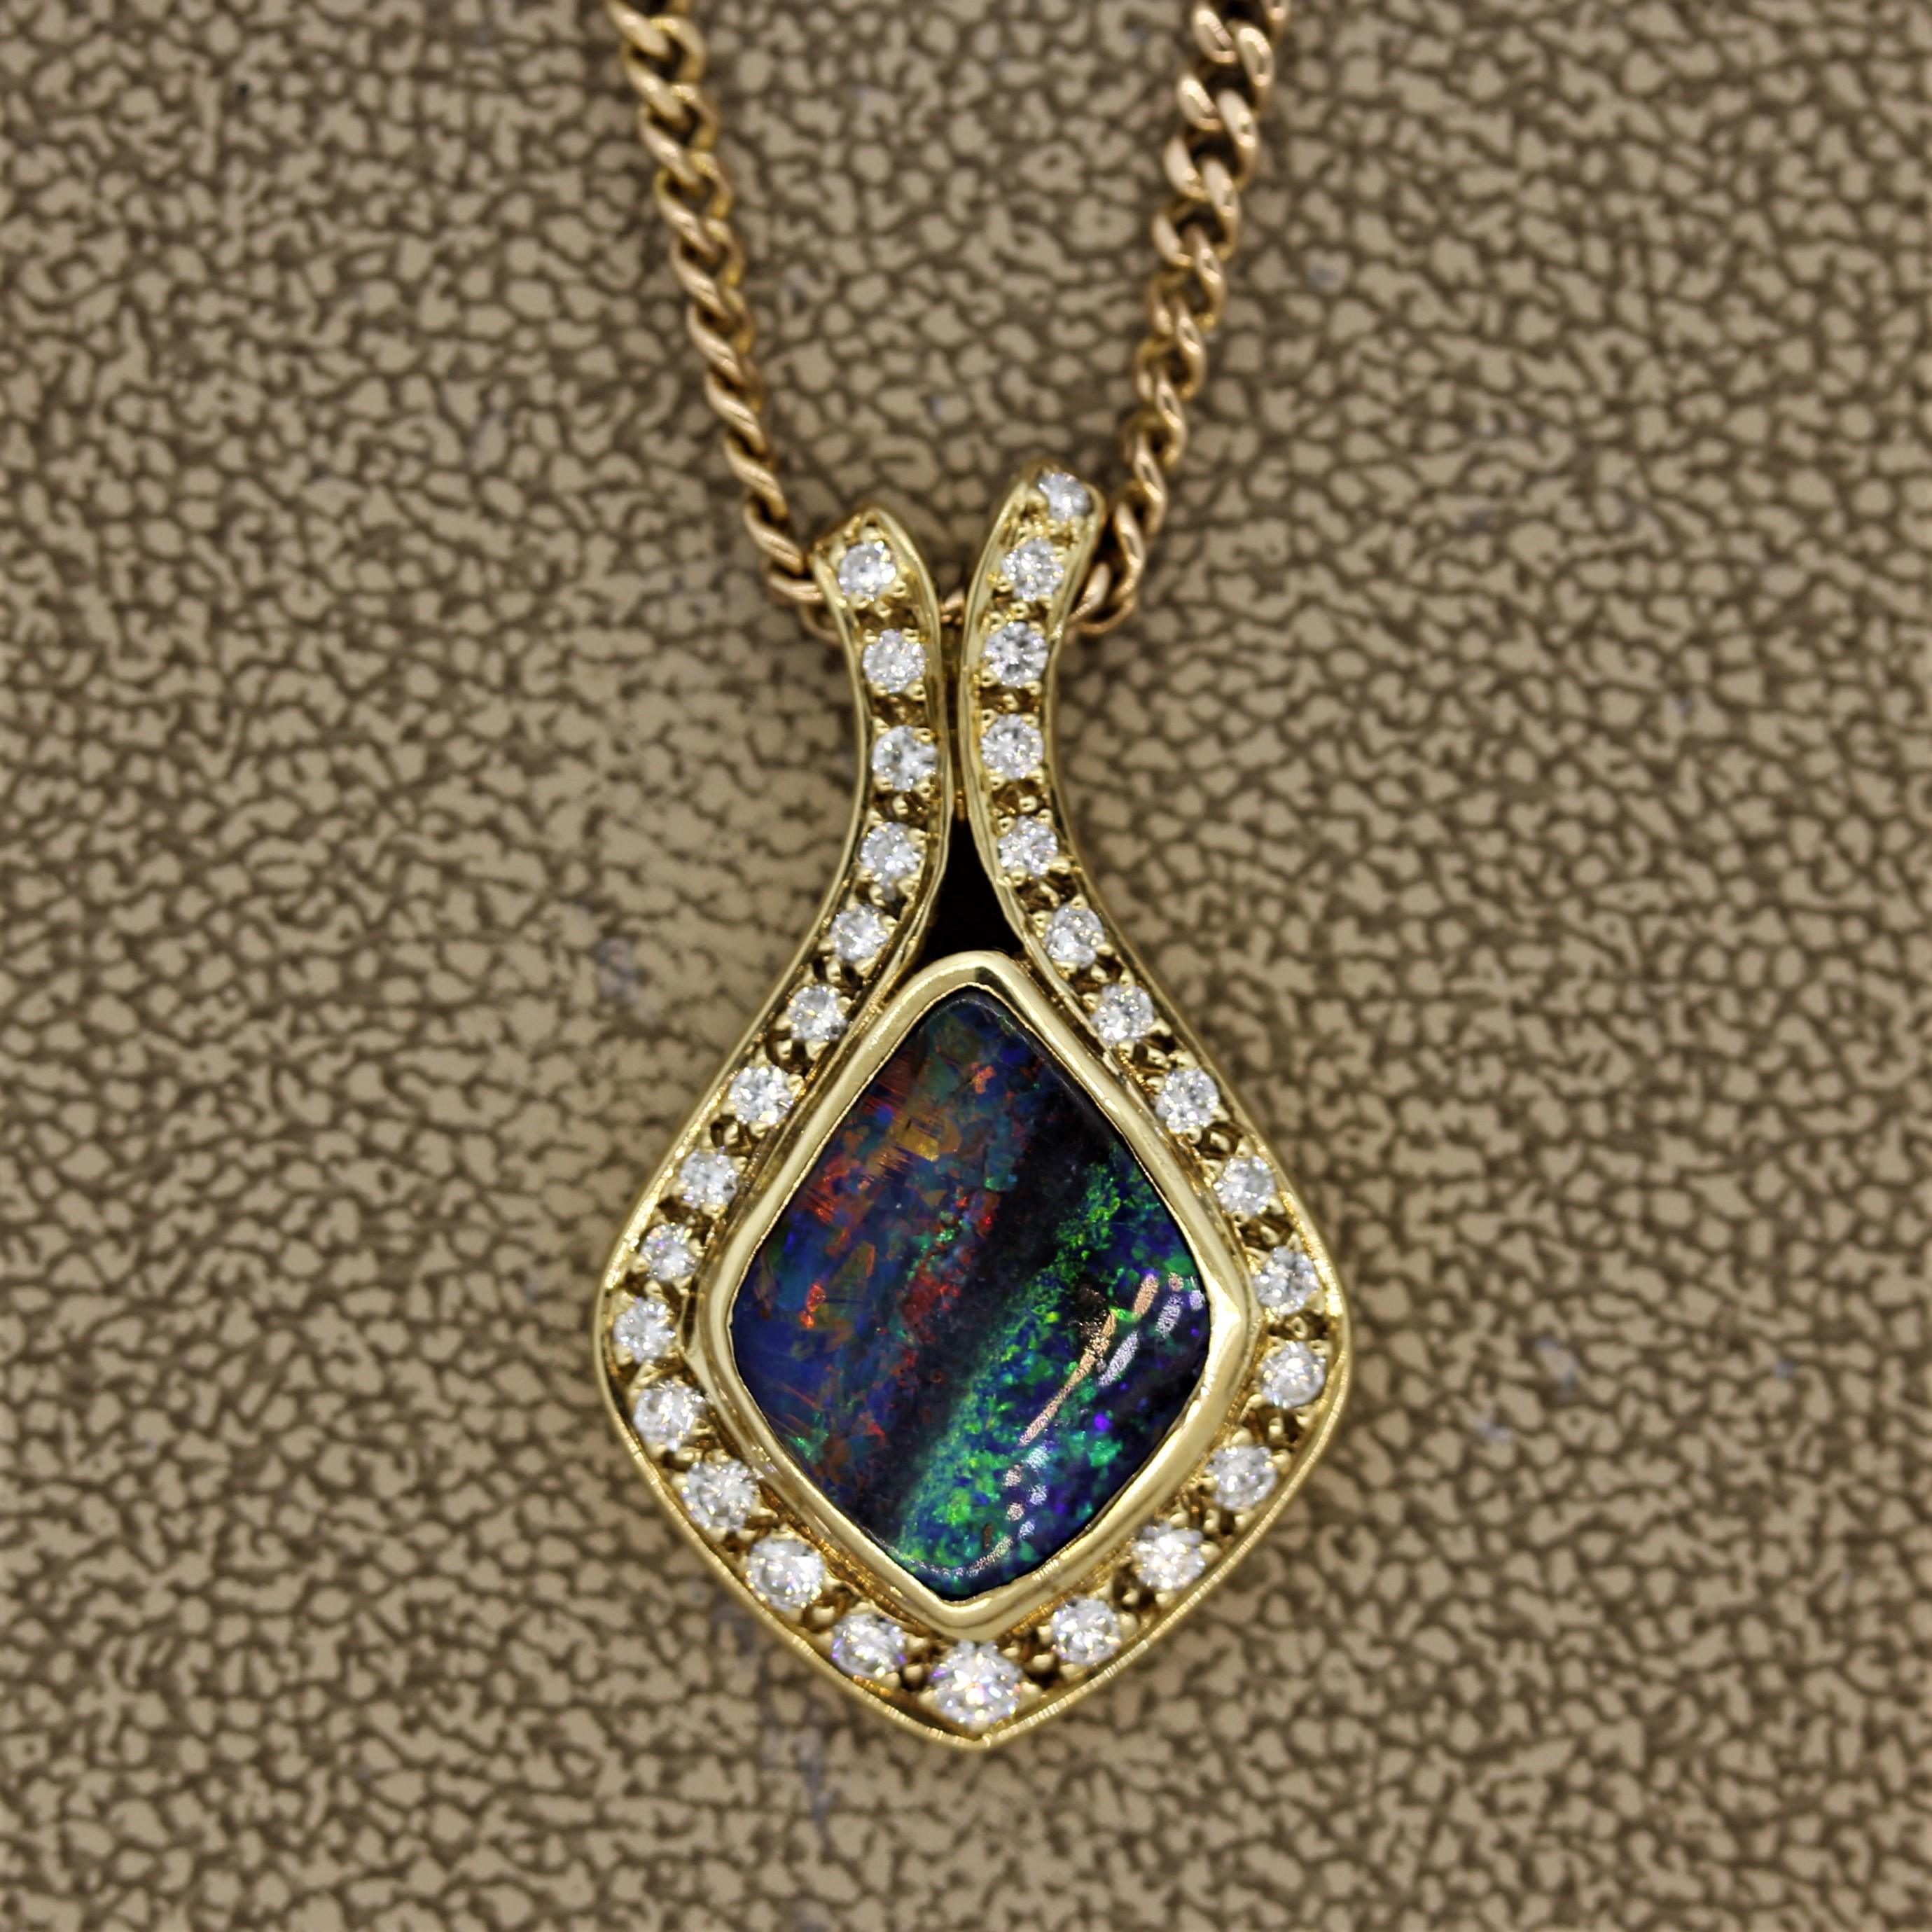 A superb boulder opal from Australia takes center stage in this fabulous pendant. The opal weighs approxemtly 3 carats and has excellent play of color. The left half of the opal shows an array of multi-colors including red, orange, green and blue,